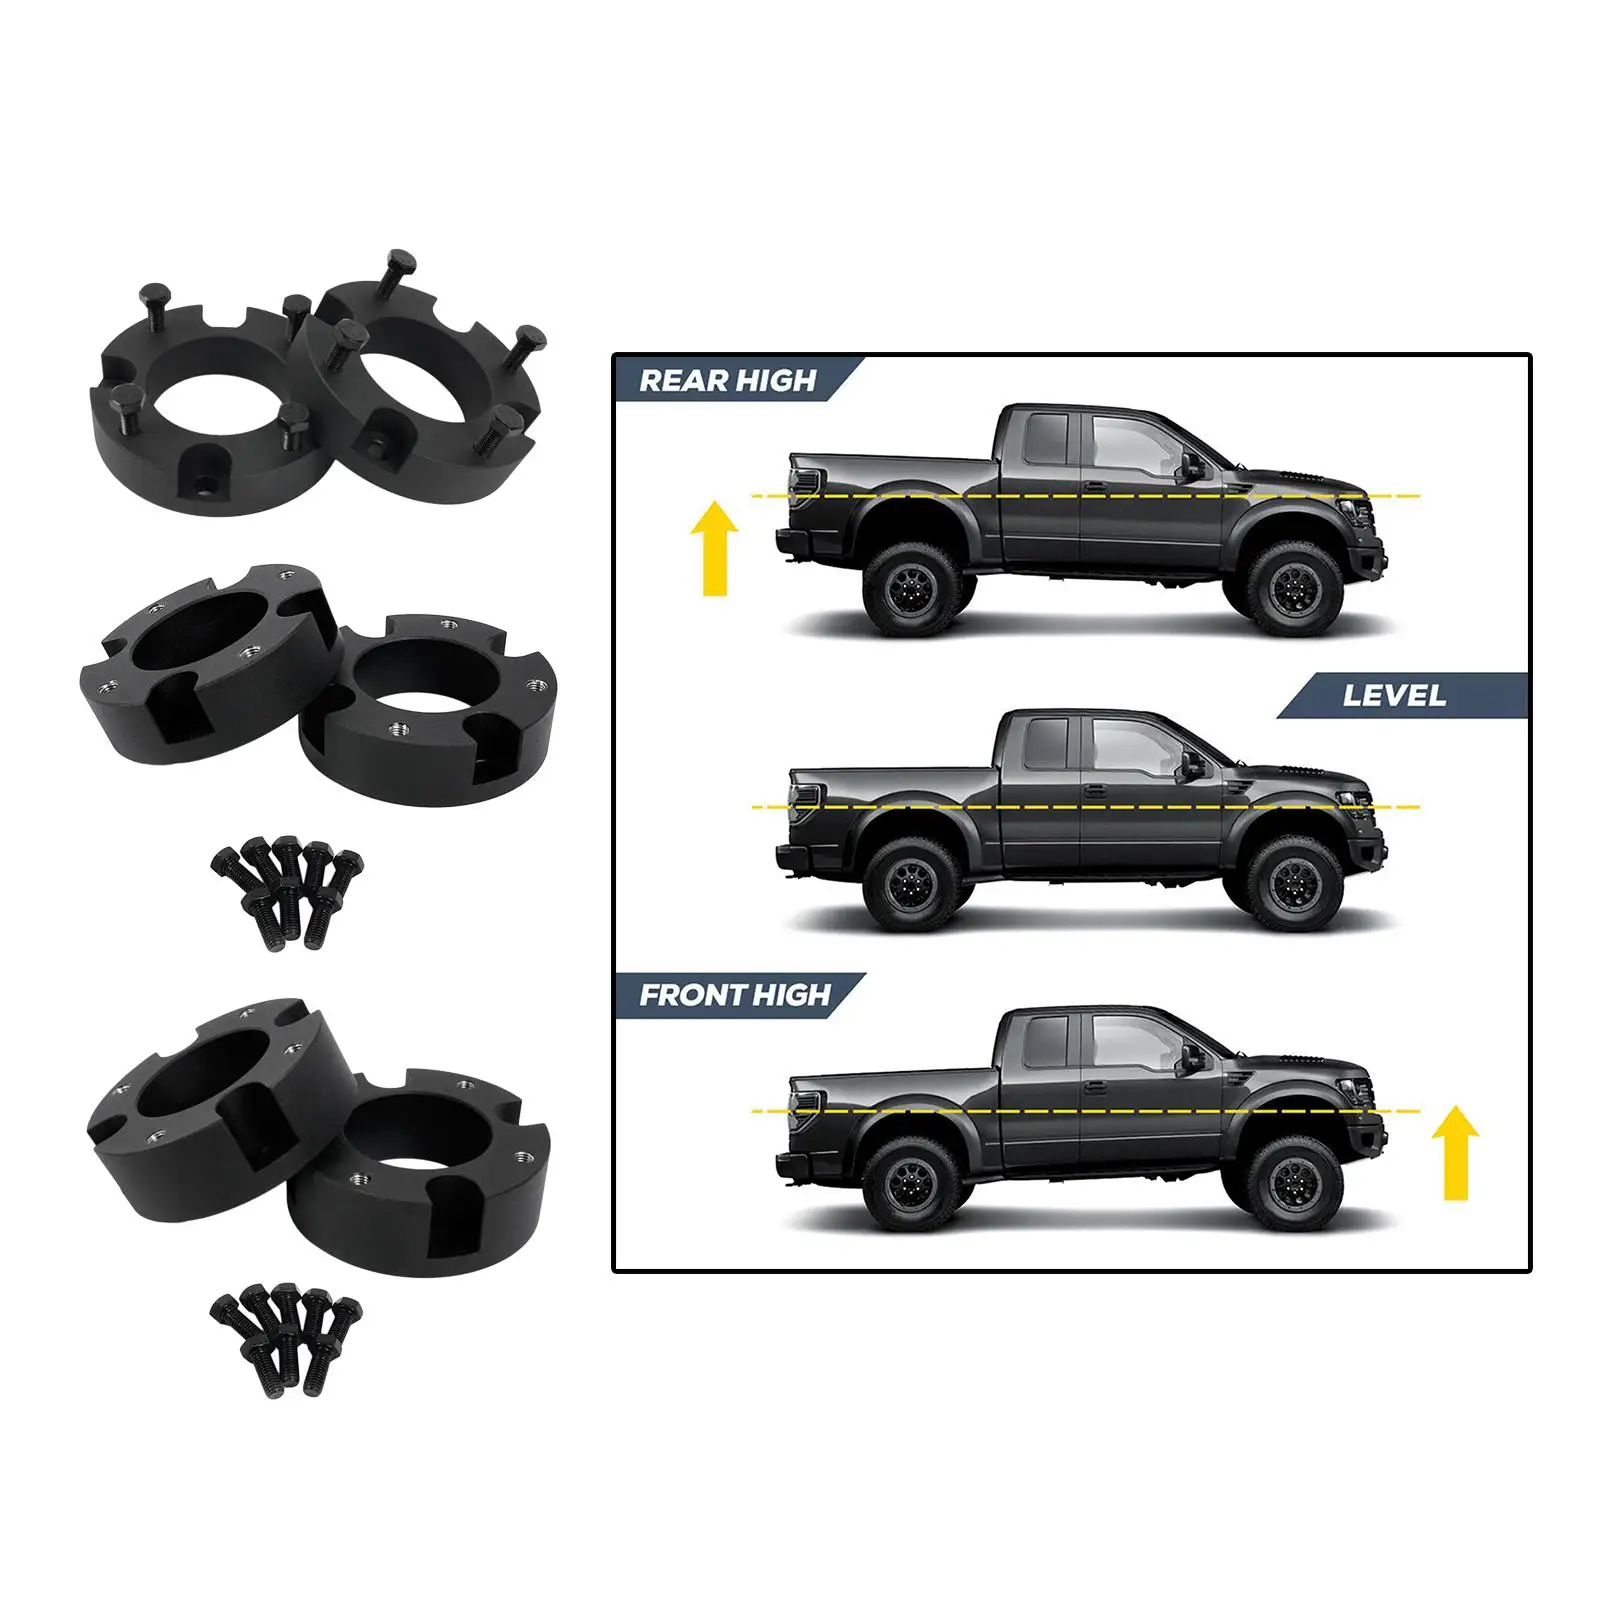 Black Leveling Lift Set Spare Parts Replaces Accessories Front Wheel Mounting Hardware for Toyota for tundra 4WD 2WD 2007-2019